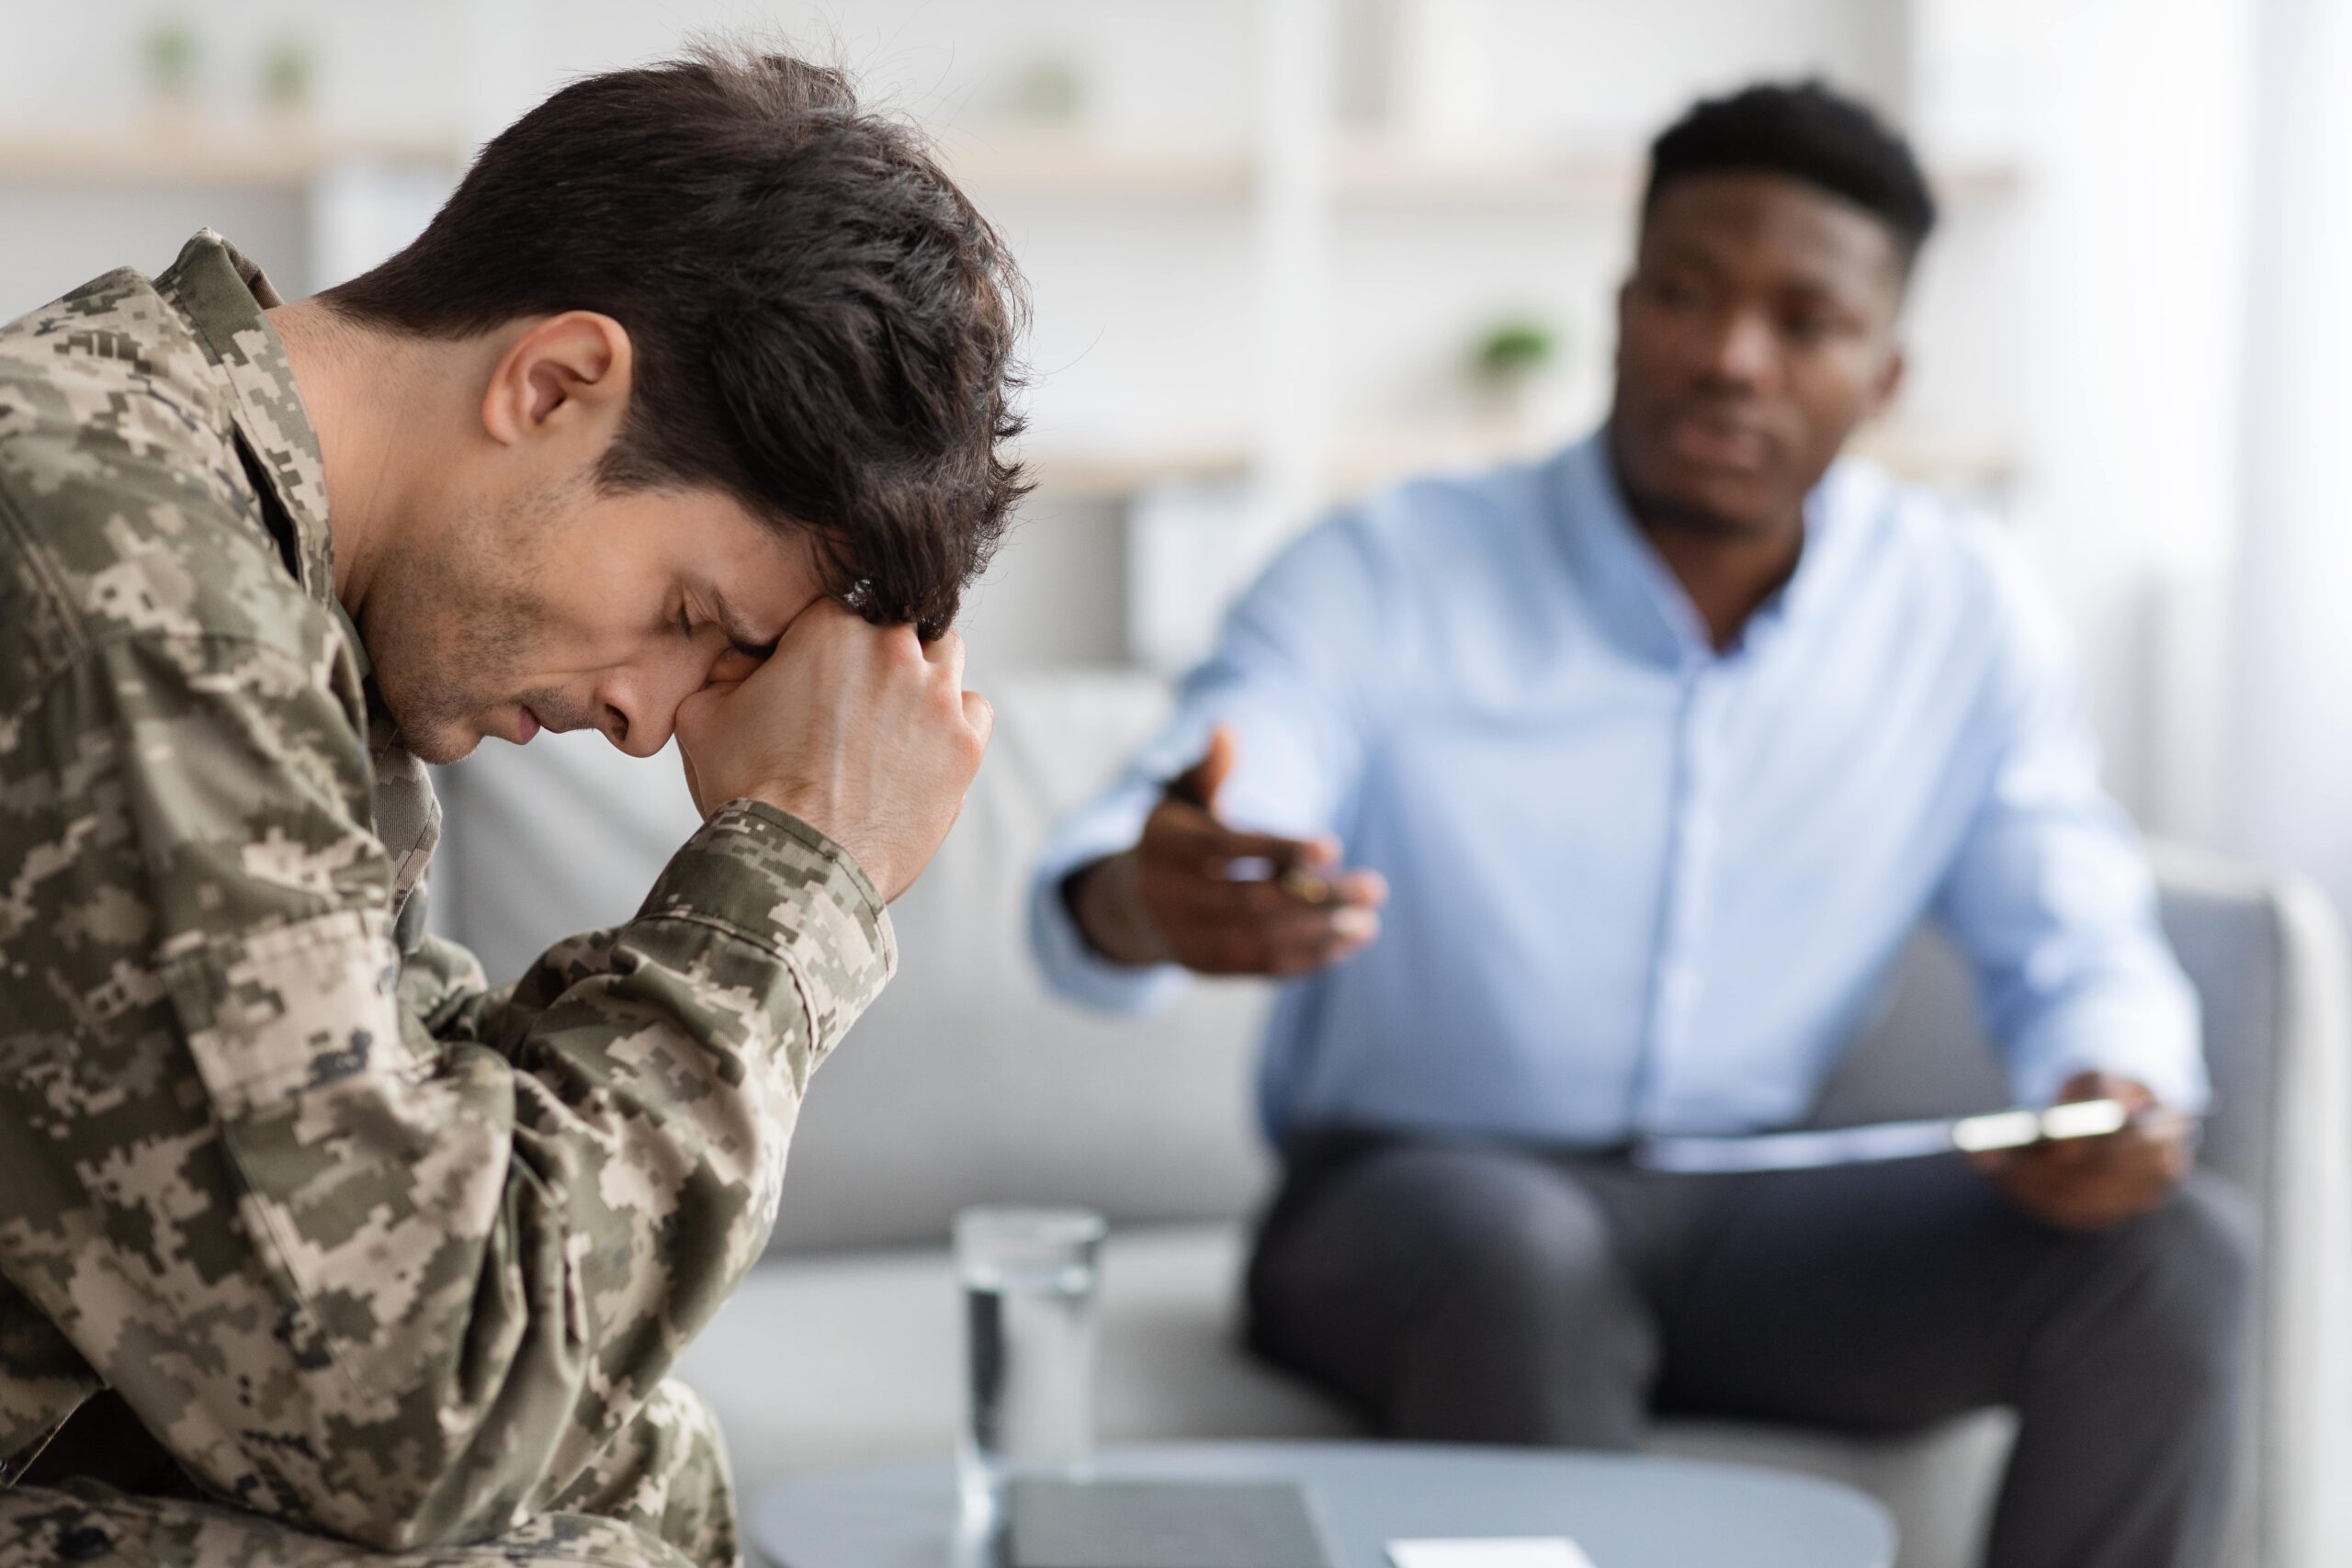 Young male soldier appearing distressed as he talks to therapist